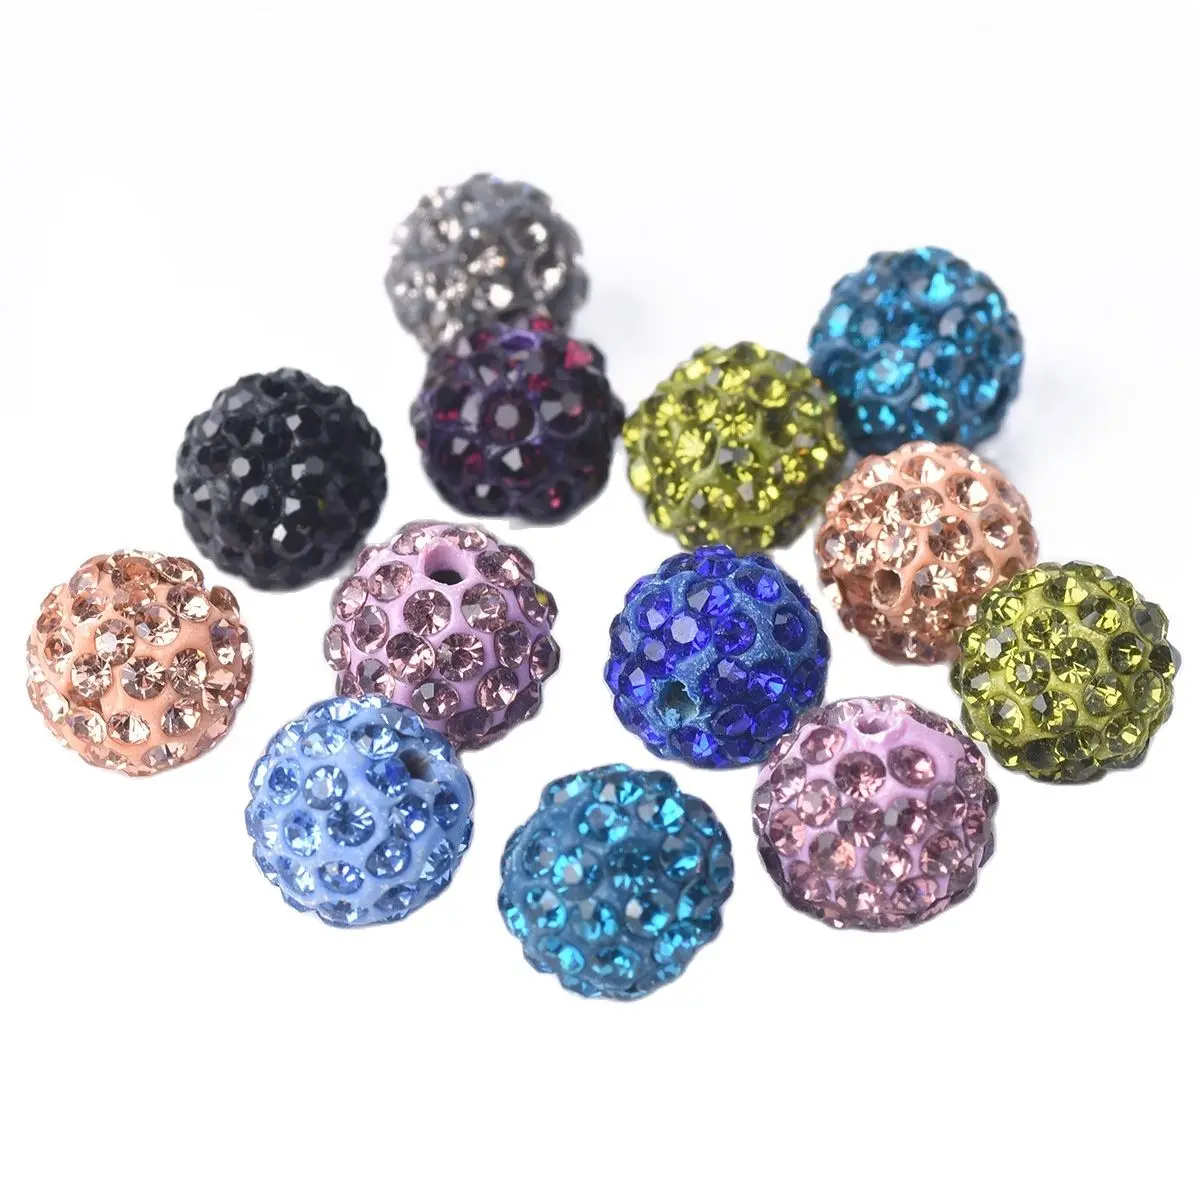 10pcs 10mm Random Mixed Colors Round Crystal Glass Ball & Cray Loose Beads for Jewelry Making DIY Crafts Findings 10pcs 10mm random mixed colors round crystal glass ball